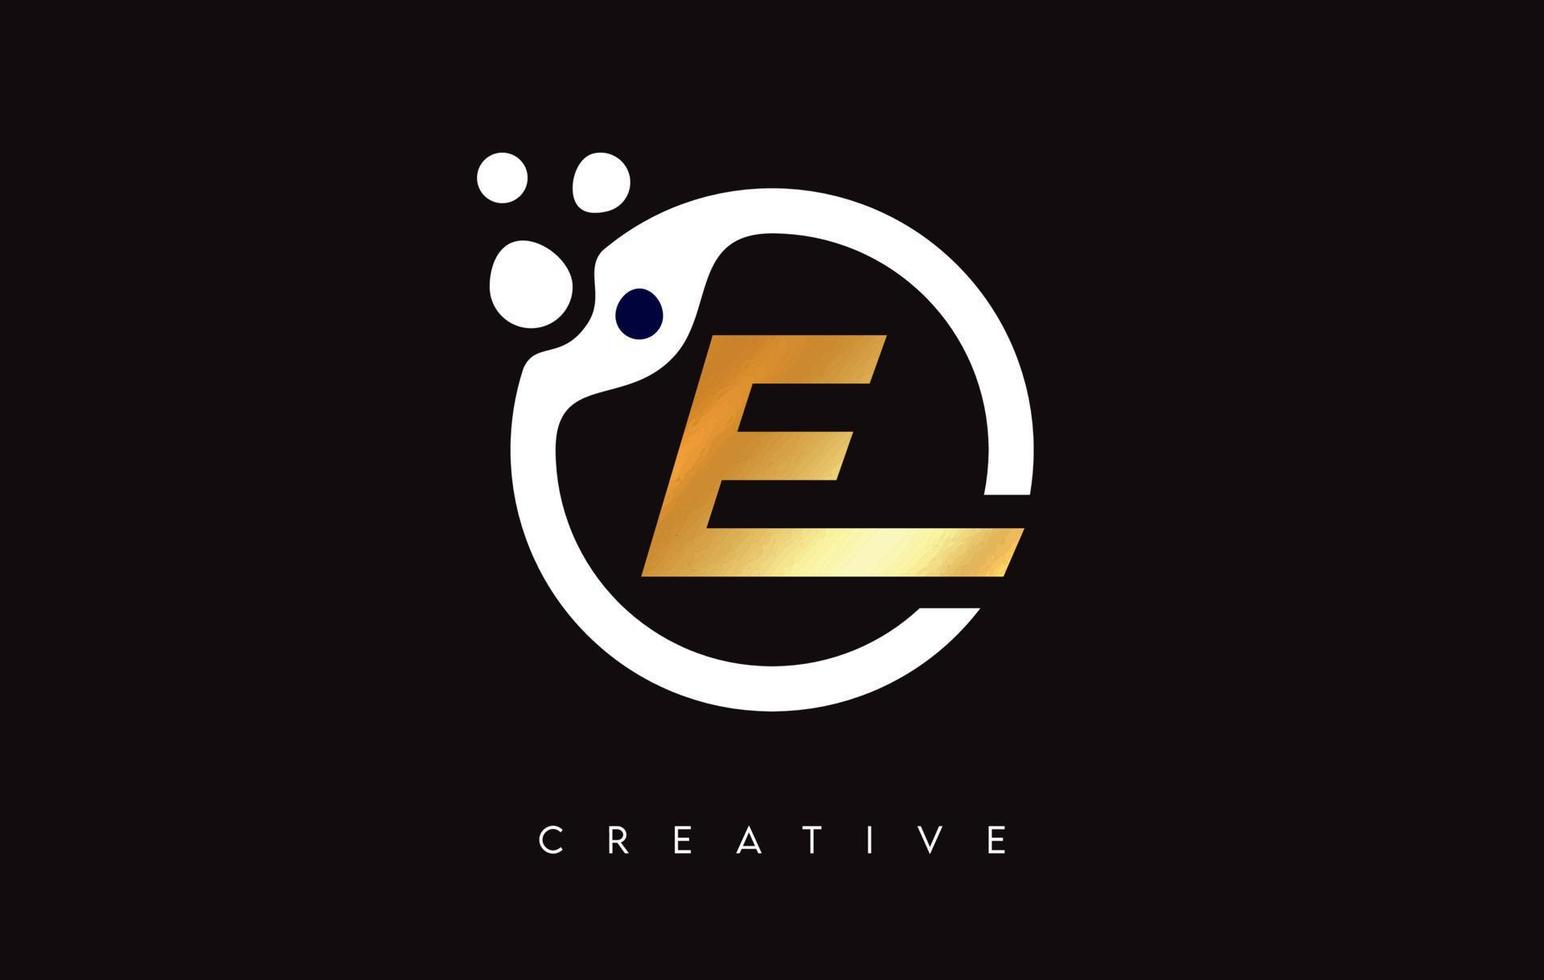 Golden Letter E Logo with Dots and Bubbles inside a Circular Shape in Gold Colors Vector